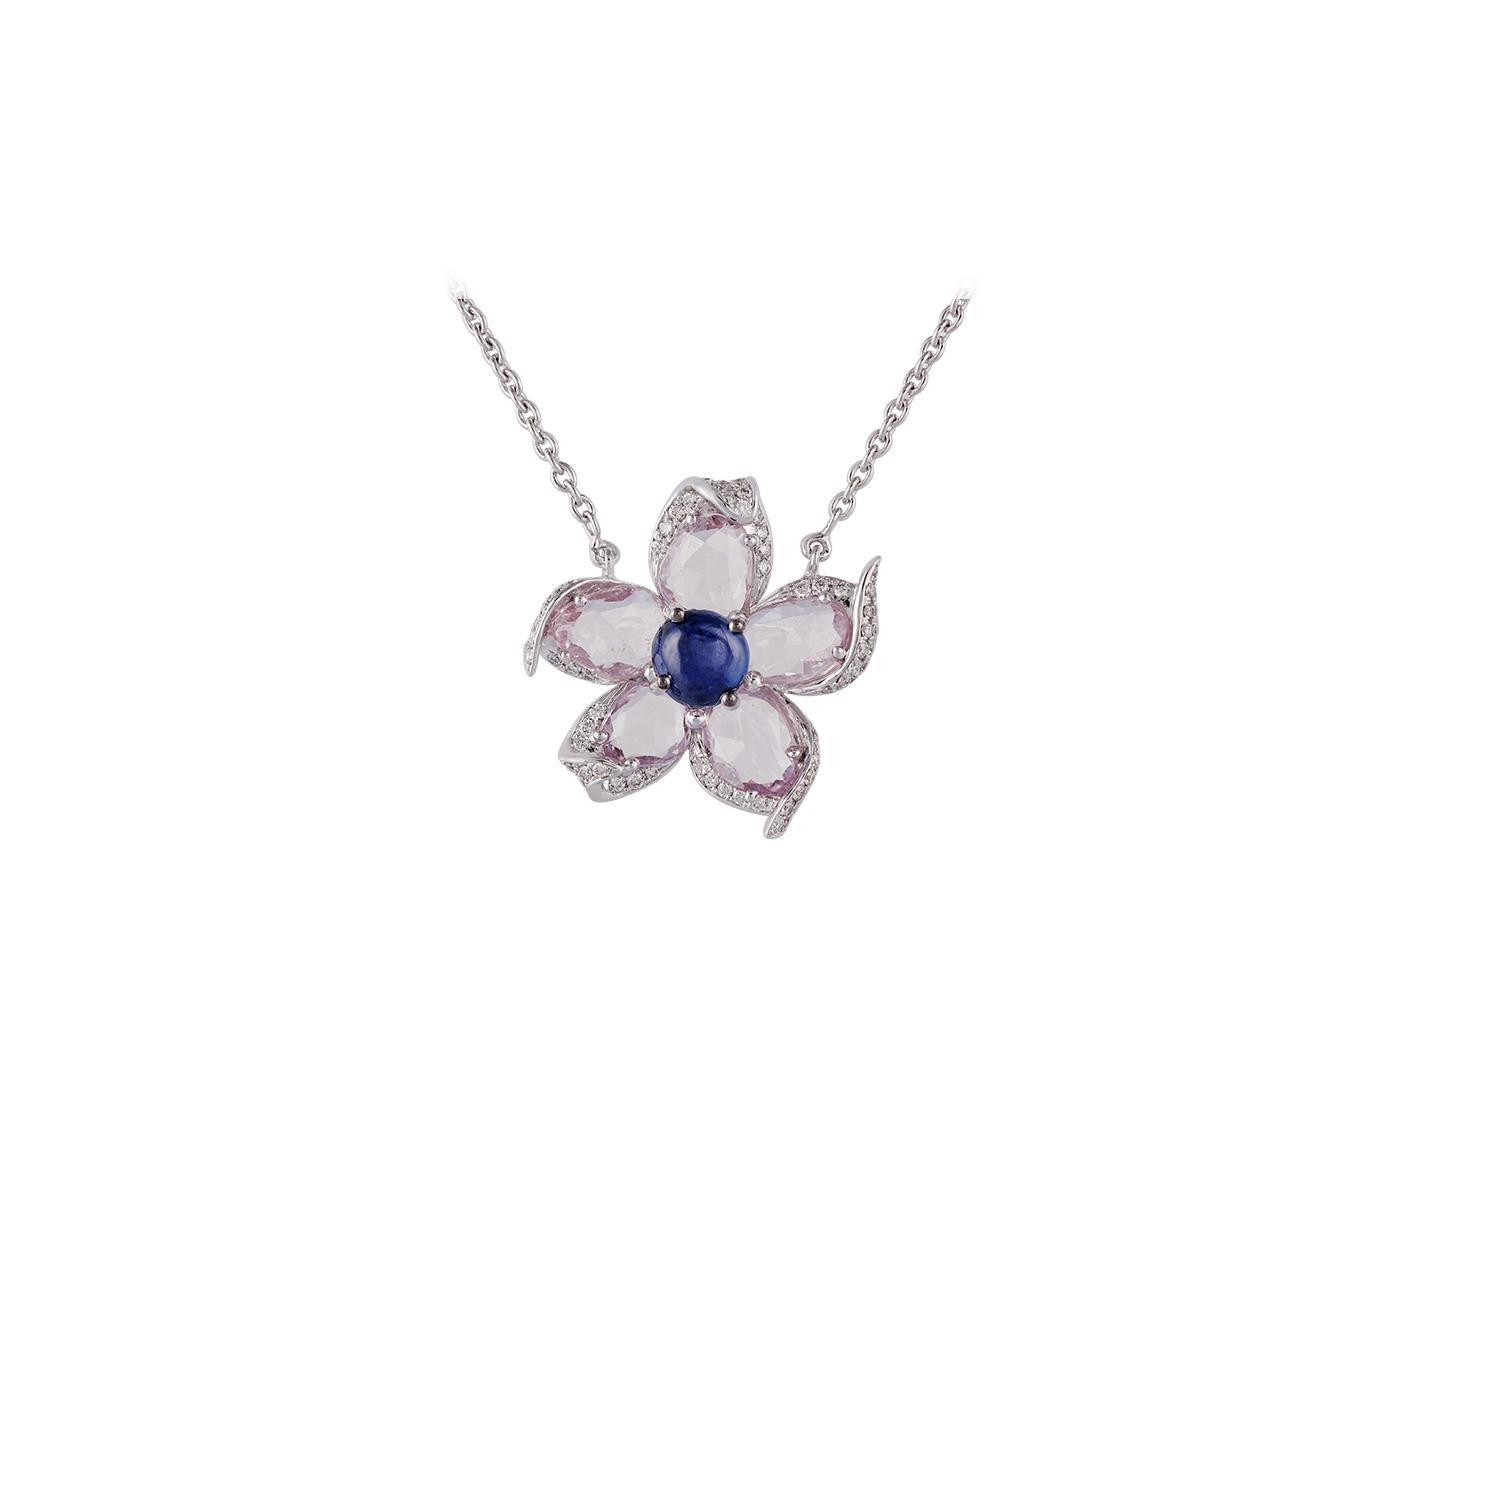 This is an elegant & designer blue sapphire, pink sapphire & diamond pendant necklace studded in 18k white gold features 1 piece of cabochon shaped blue sapphire weight 0.98 carat, 5 pieces of rose cut pink sapphire weight 3.19 carat with 78 pieces